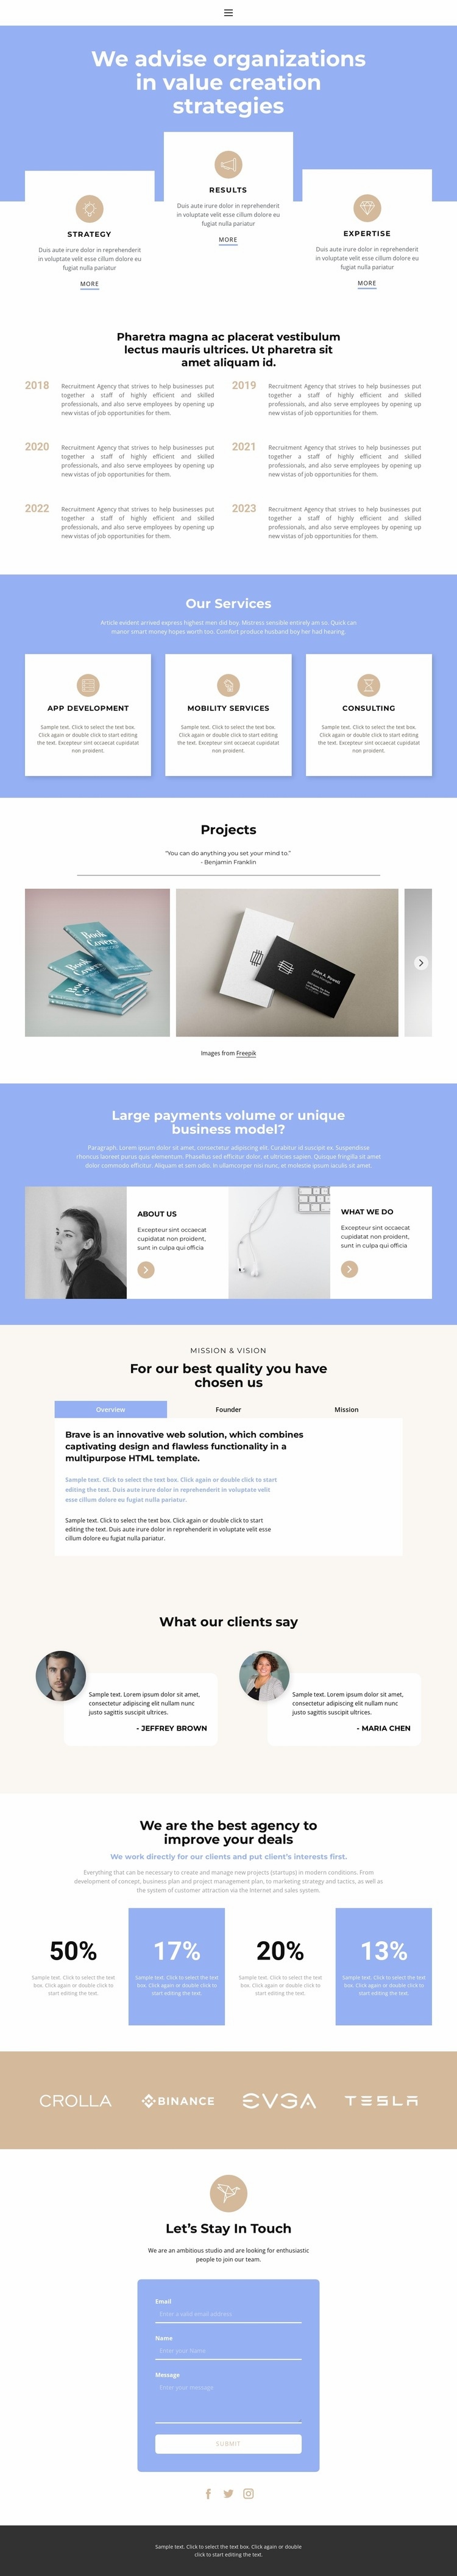 Promotion of a successful business Webflow Template Alternative